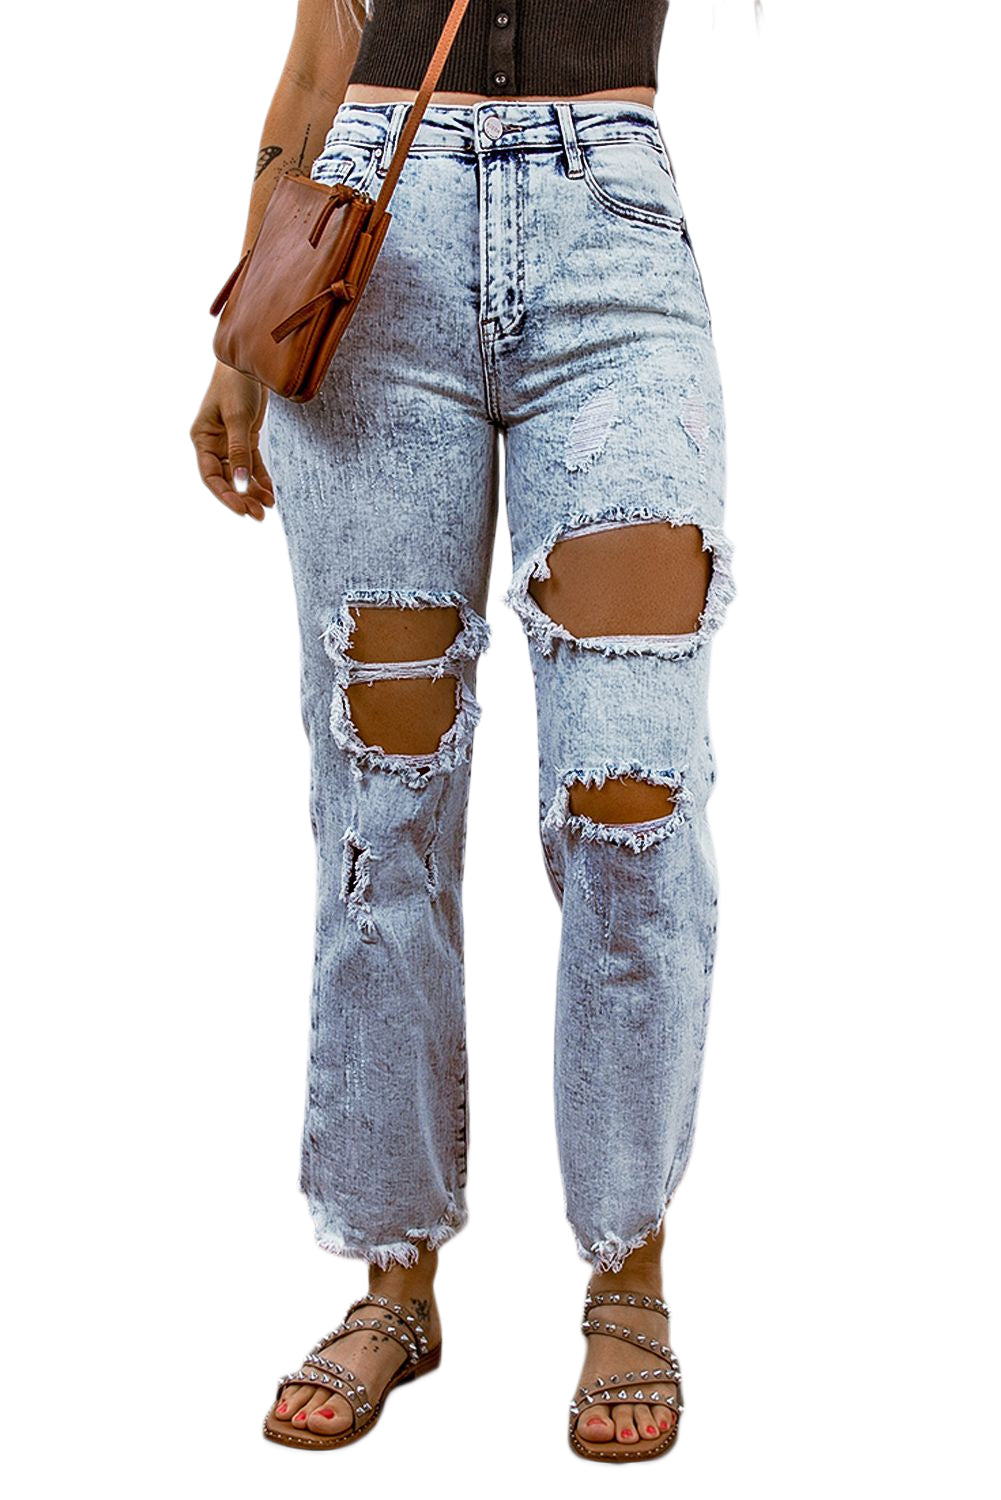 Sky Blue Hollow-Out Light Washed Ripped Boyfriend Jeans